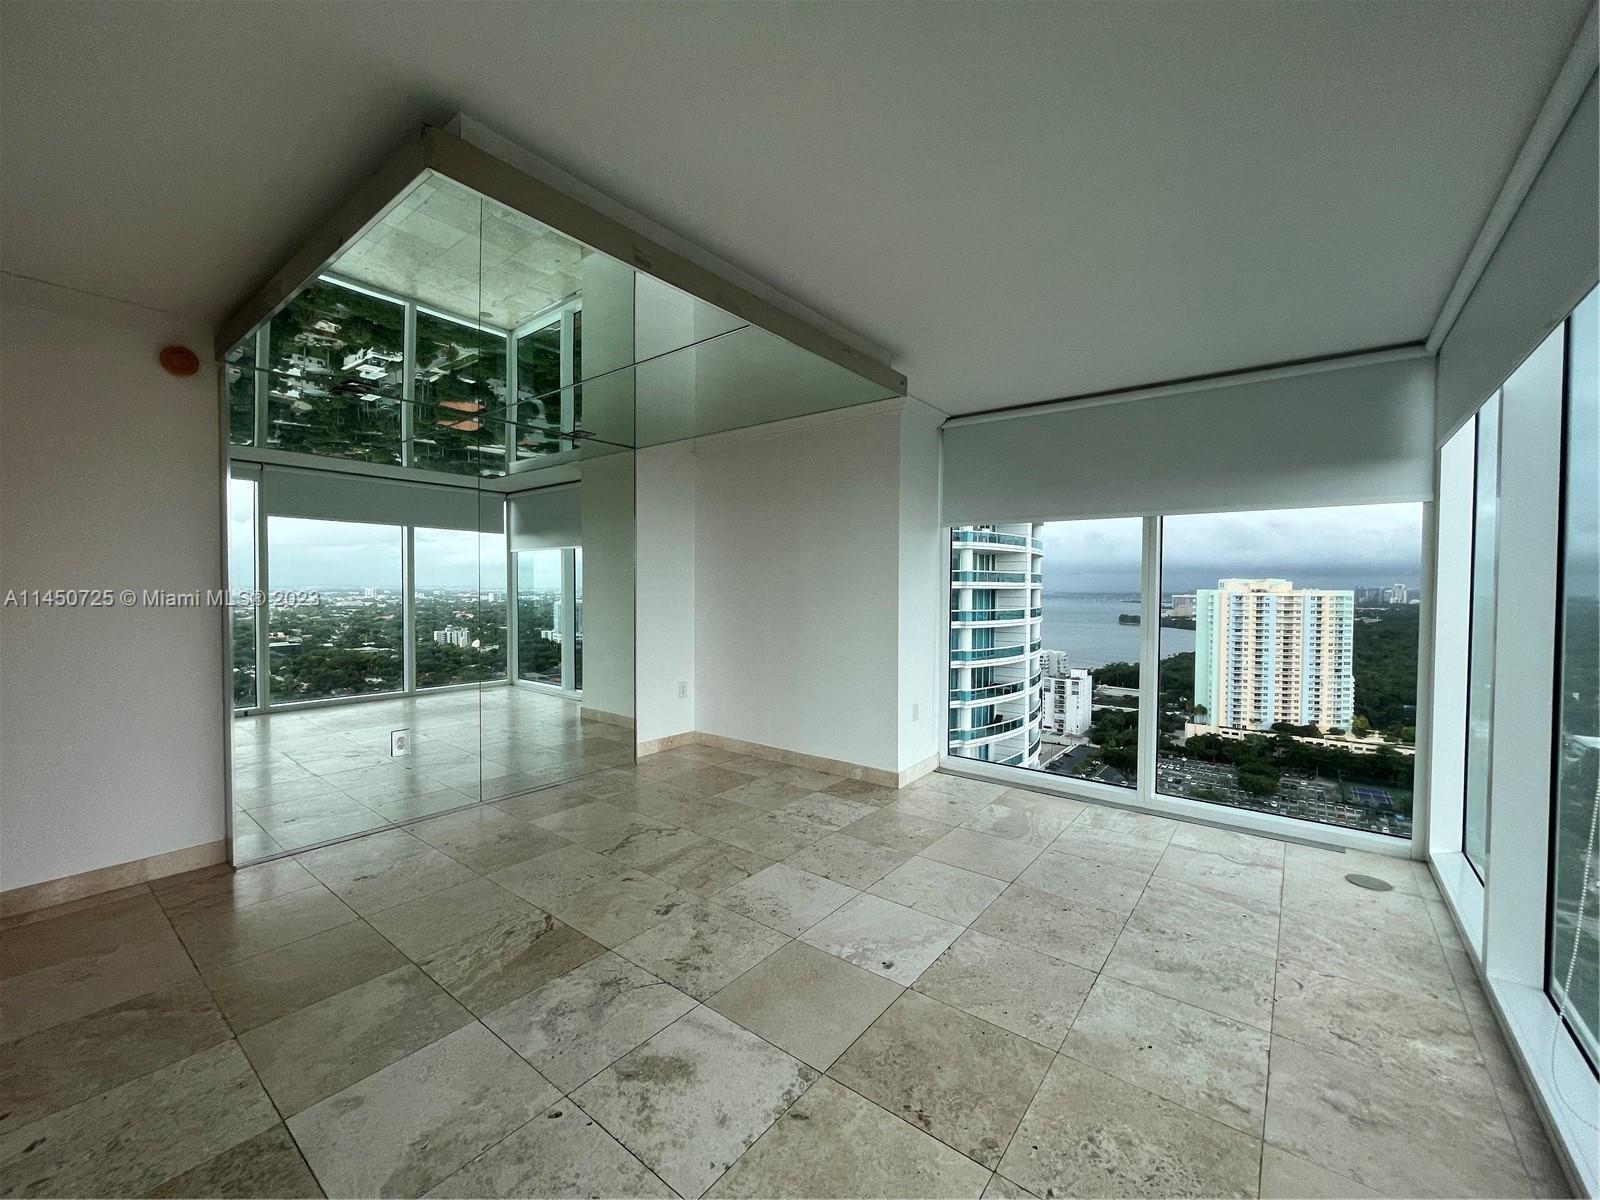 Beautiful 2 bedroom, 2 bath unit with partial waterview and skyline views from the 29 Floor. Spaciou